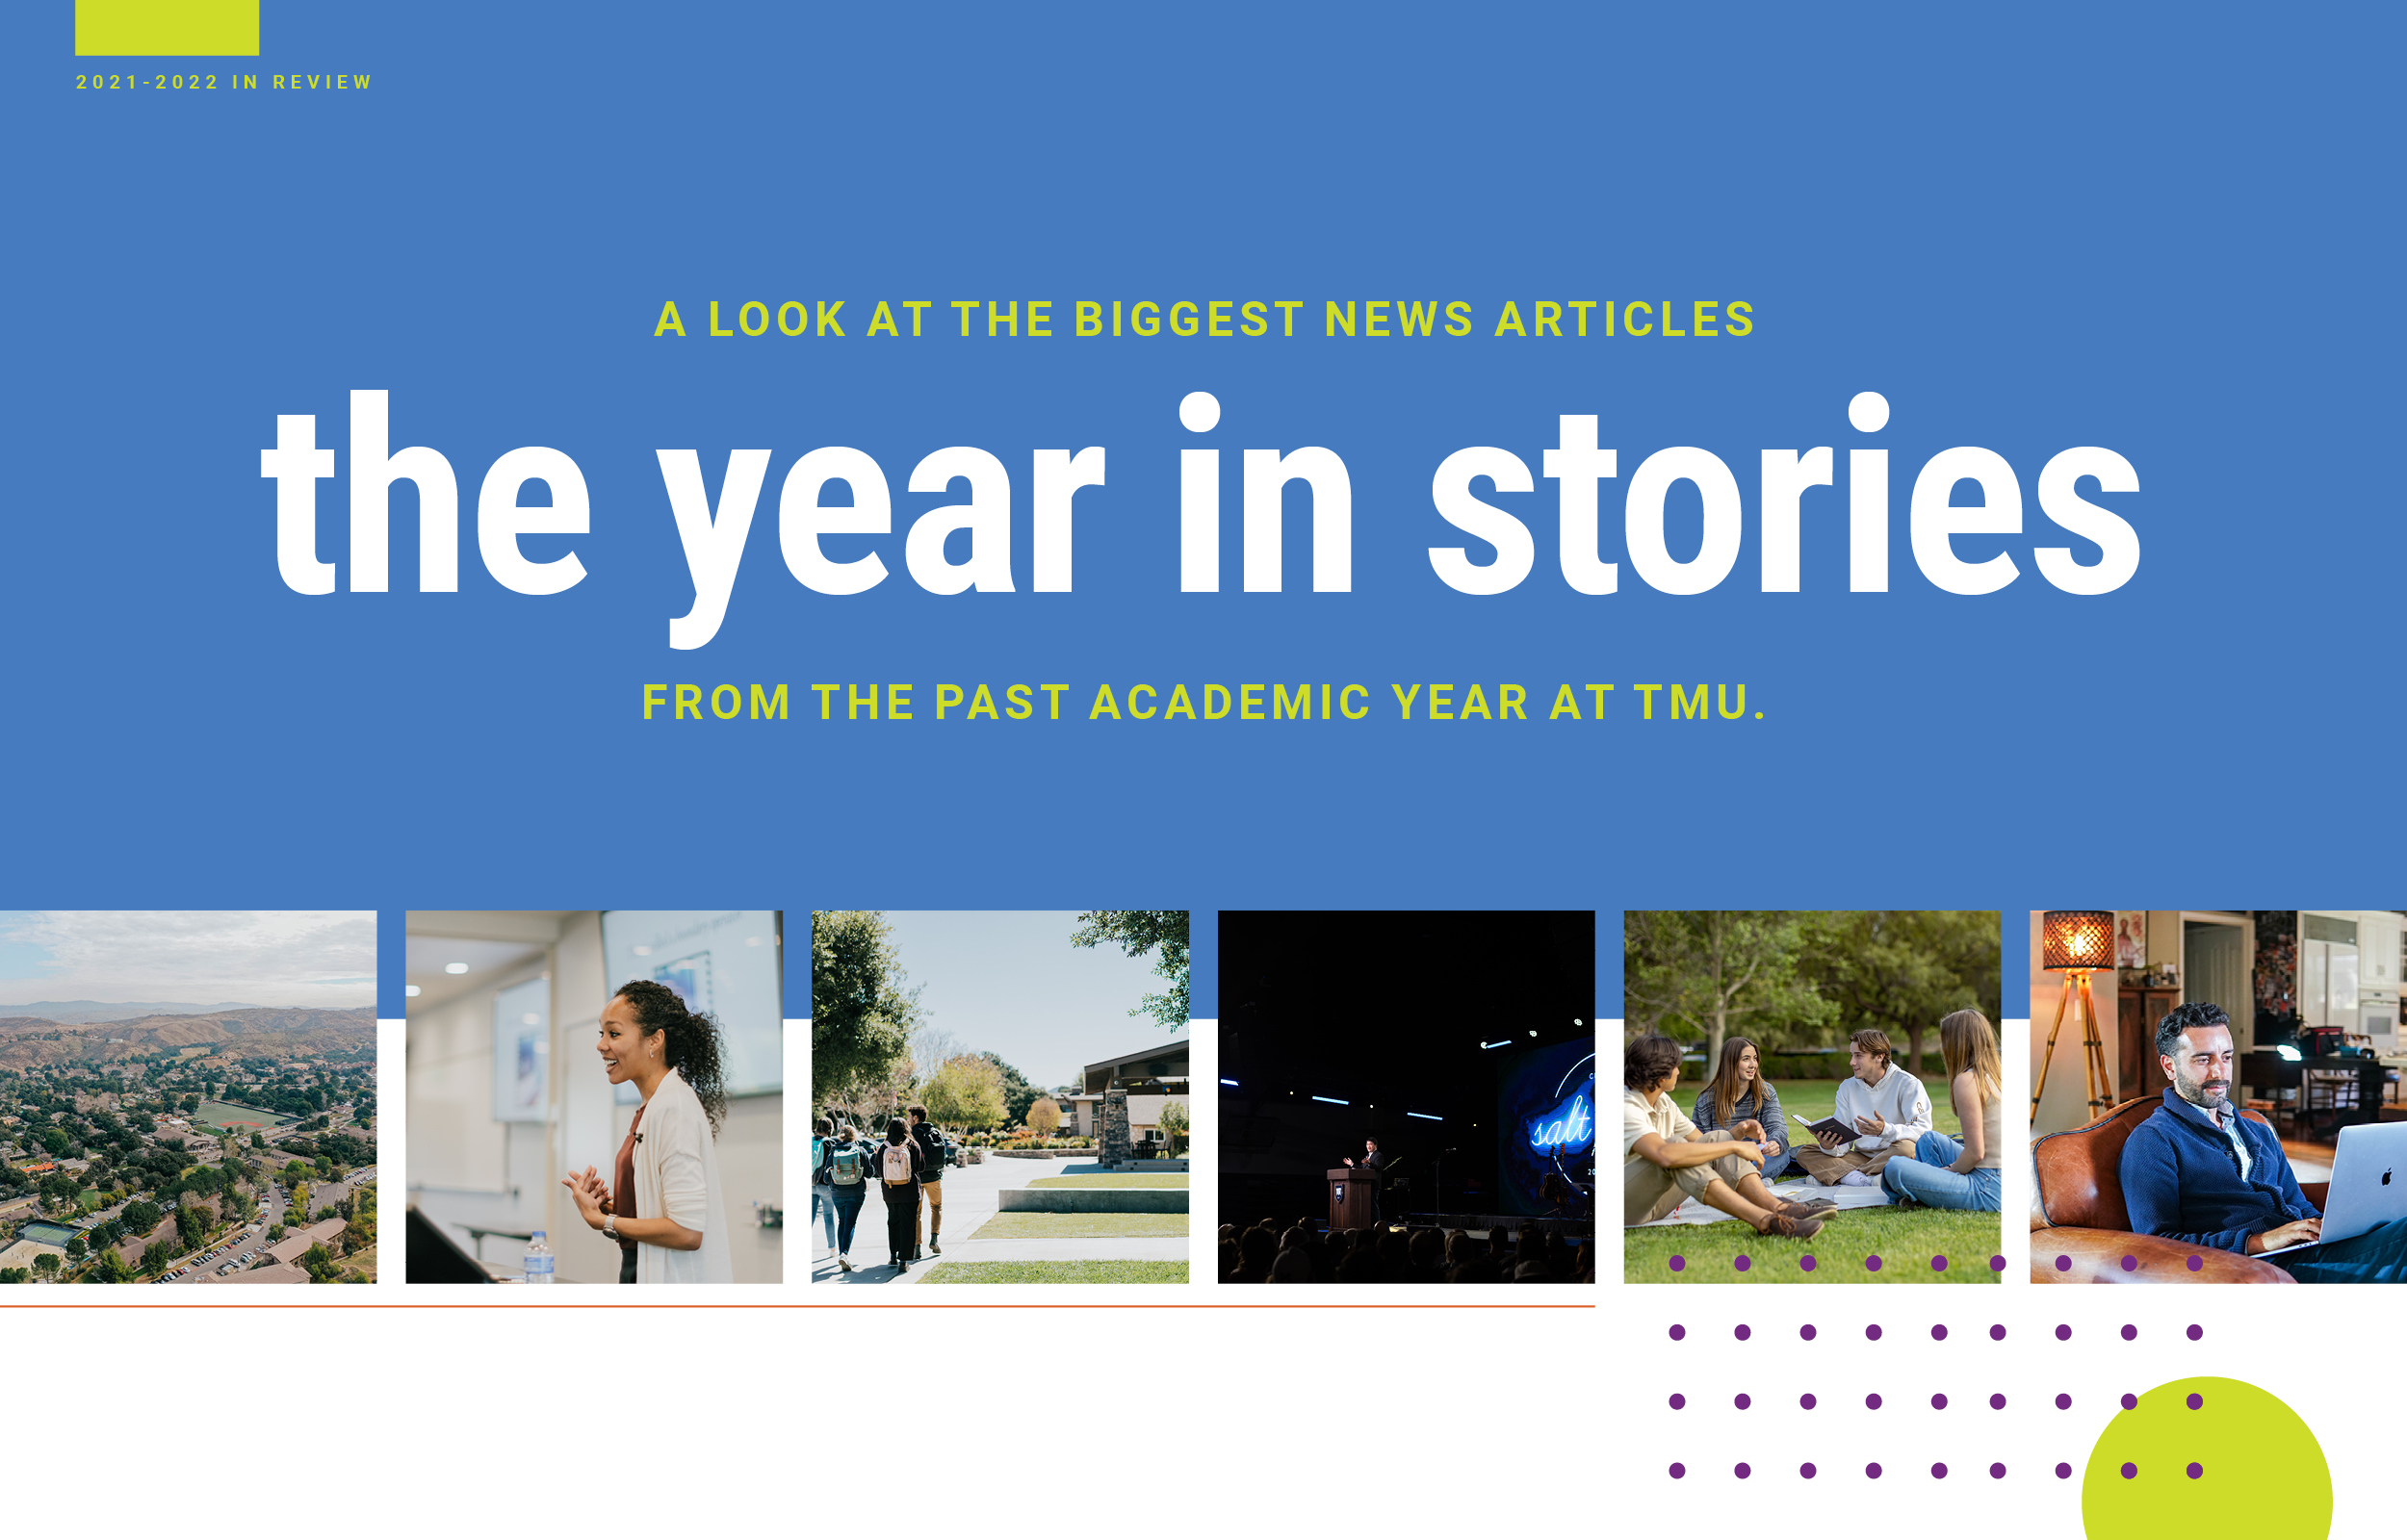 The Year in Stories image